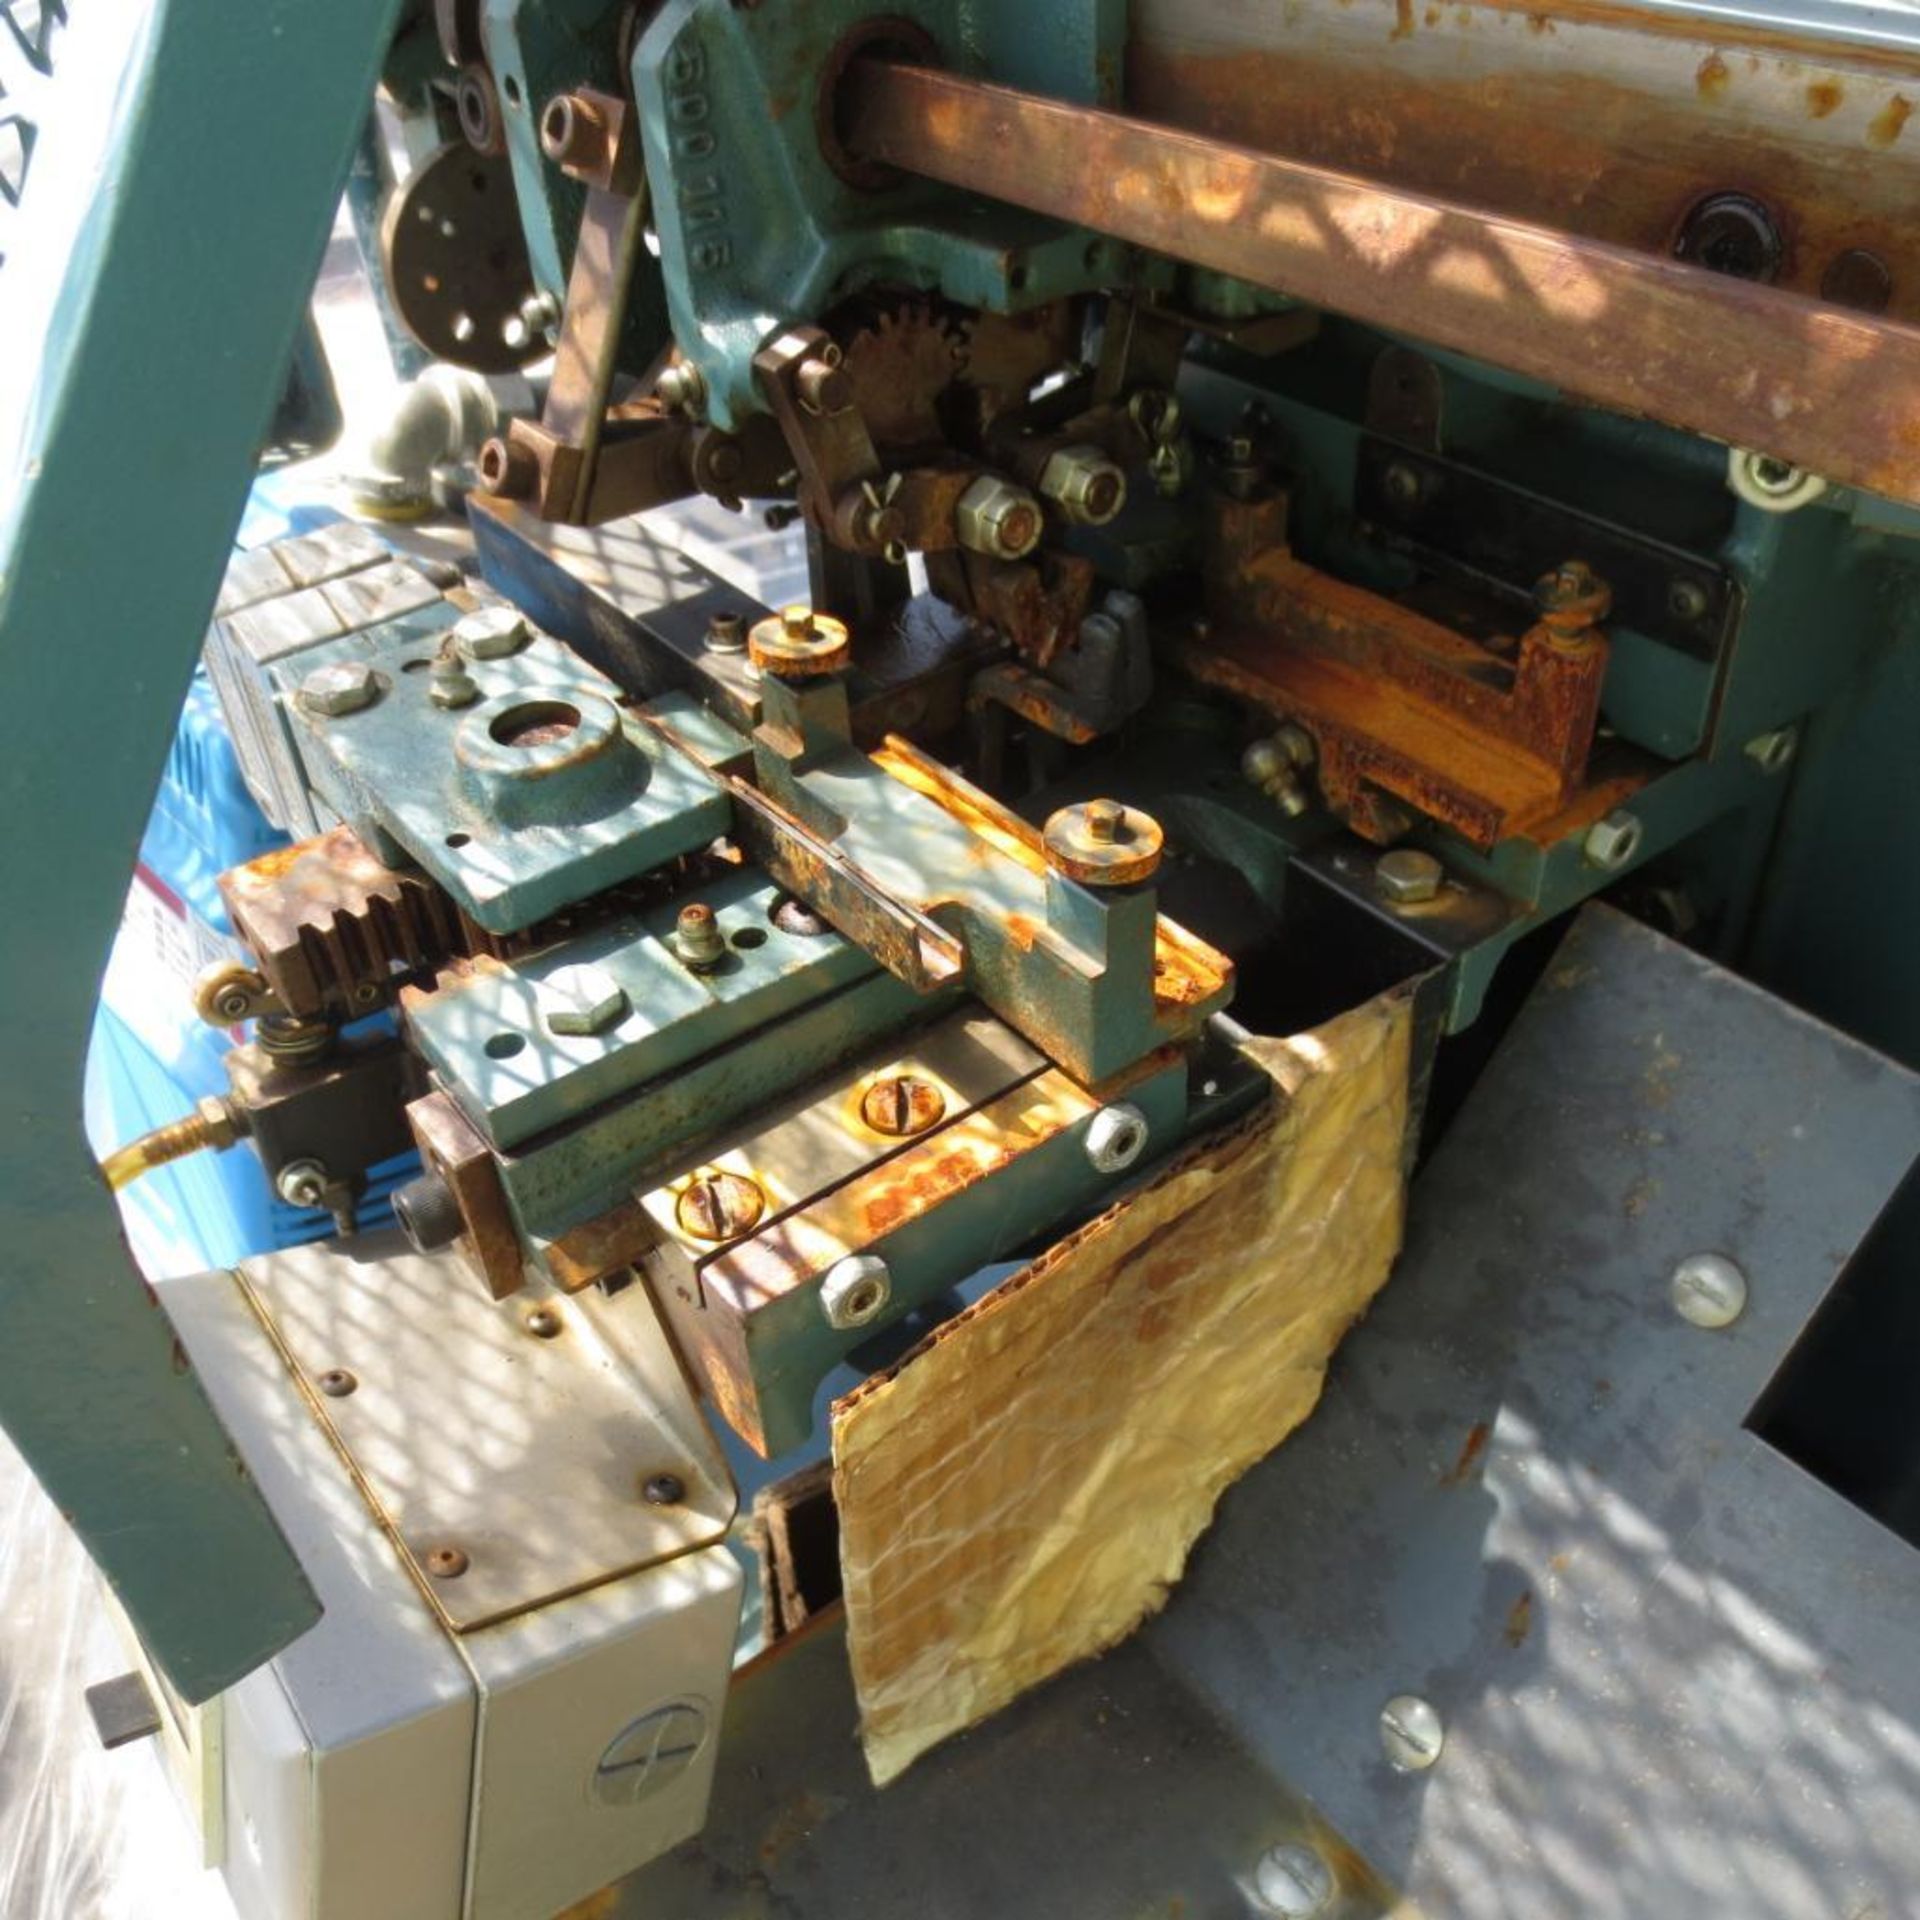 Artos Wire Cutter Machine located at 707 Burlington Ave Logansport, IN 46947 - Image 2 of 2